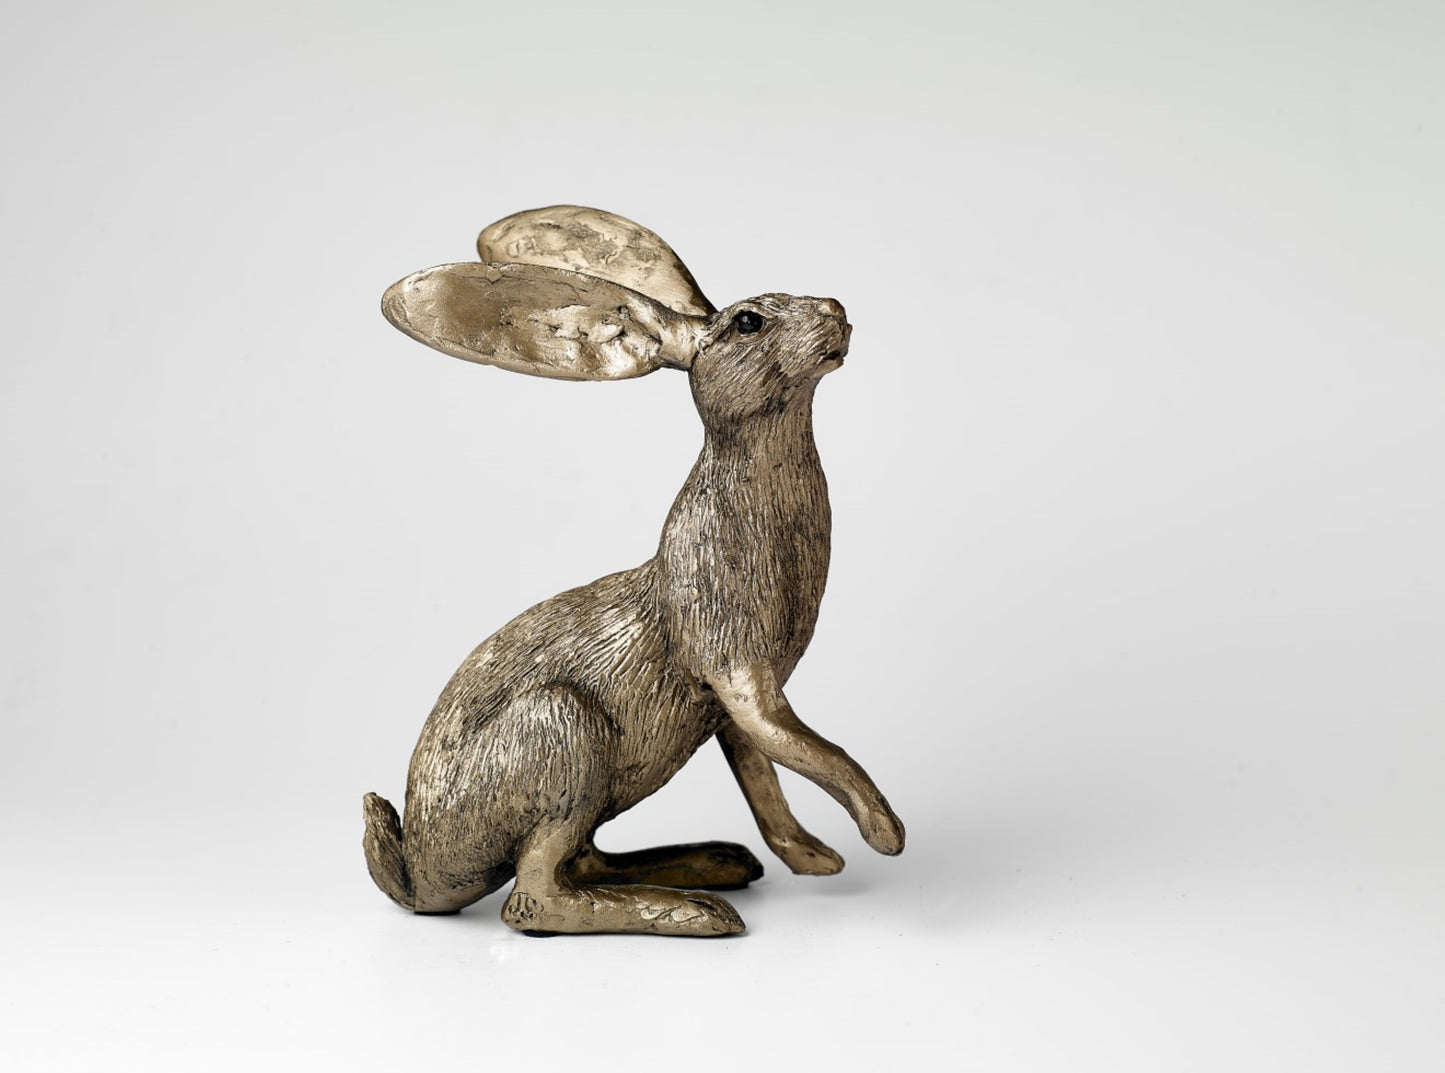 Hare Bronze Figurine by Jonny Sanders Paws Up (Frith Sculpture)